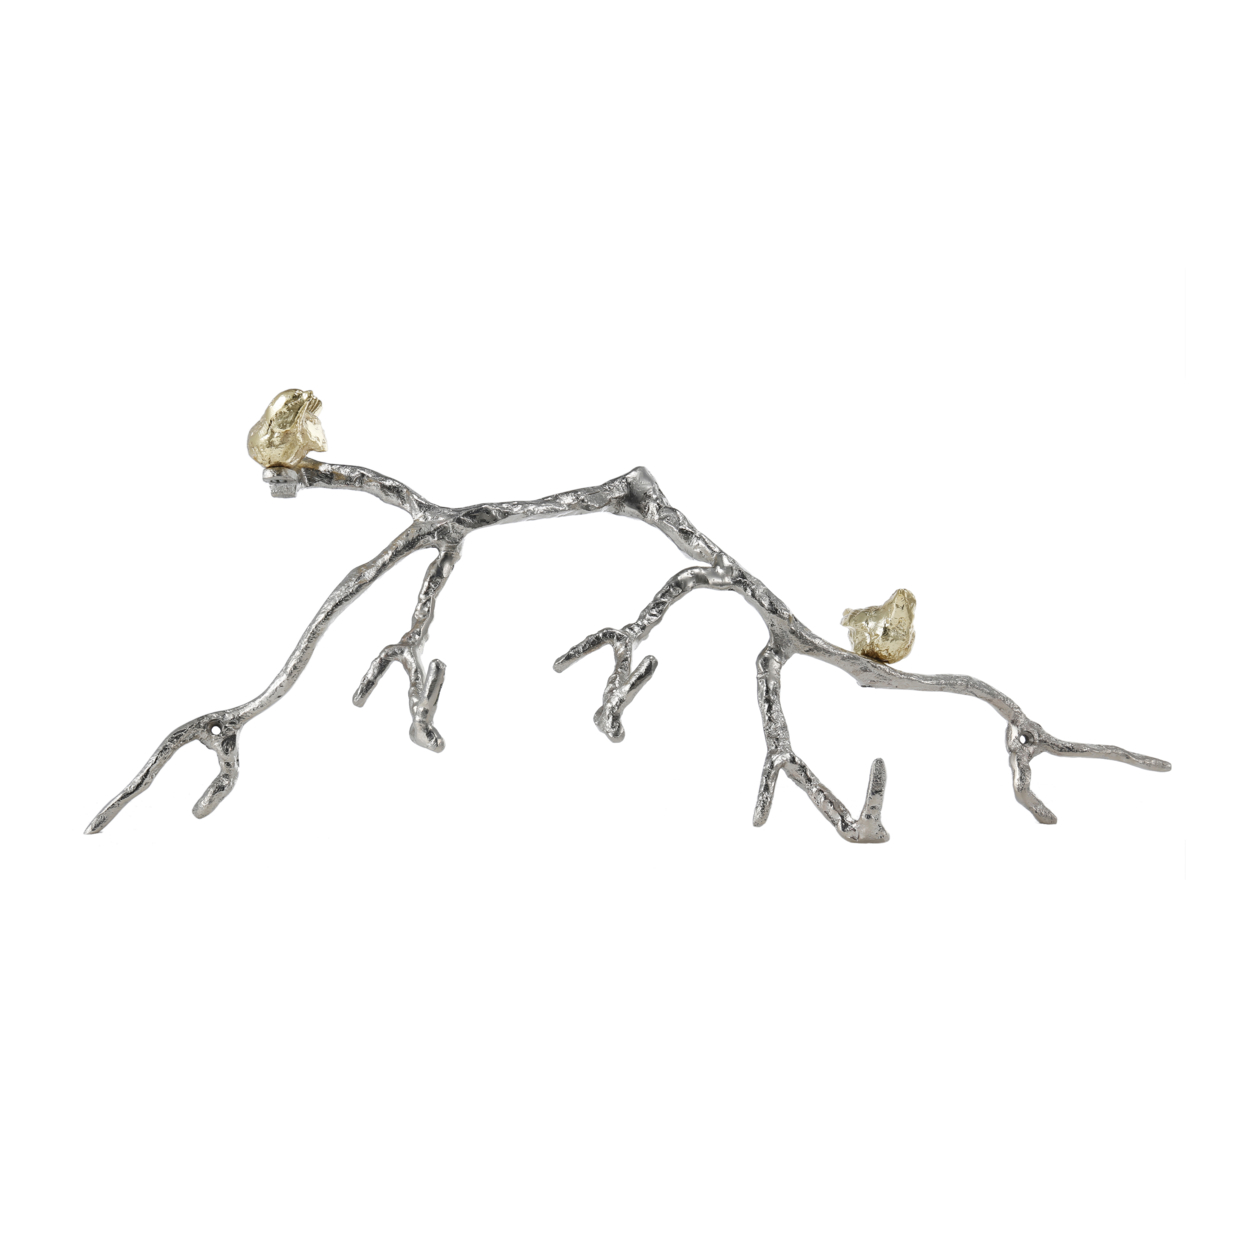 Decorative Wall Hook Branch Shaped With Birds Apogee, Silver And Gold- Saltoro Sherpi